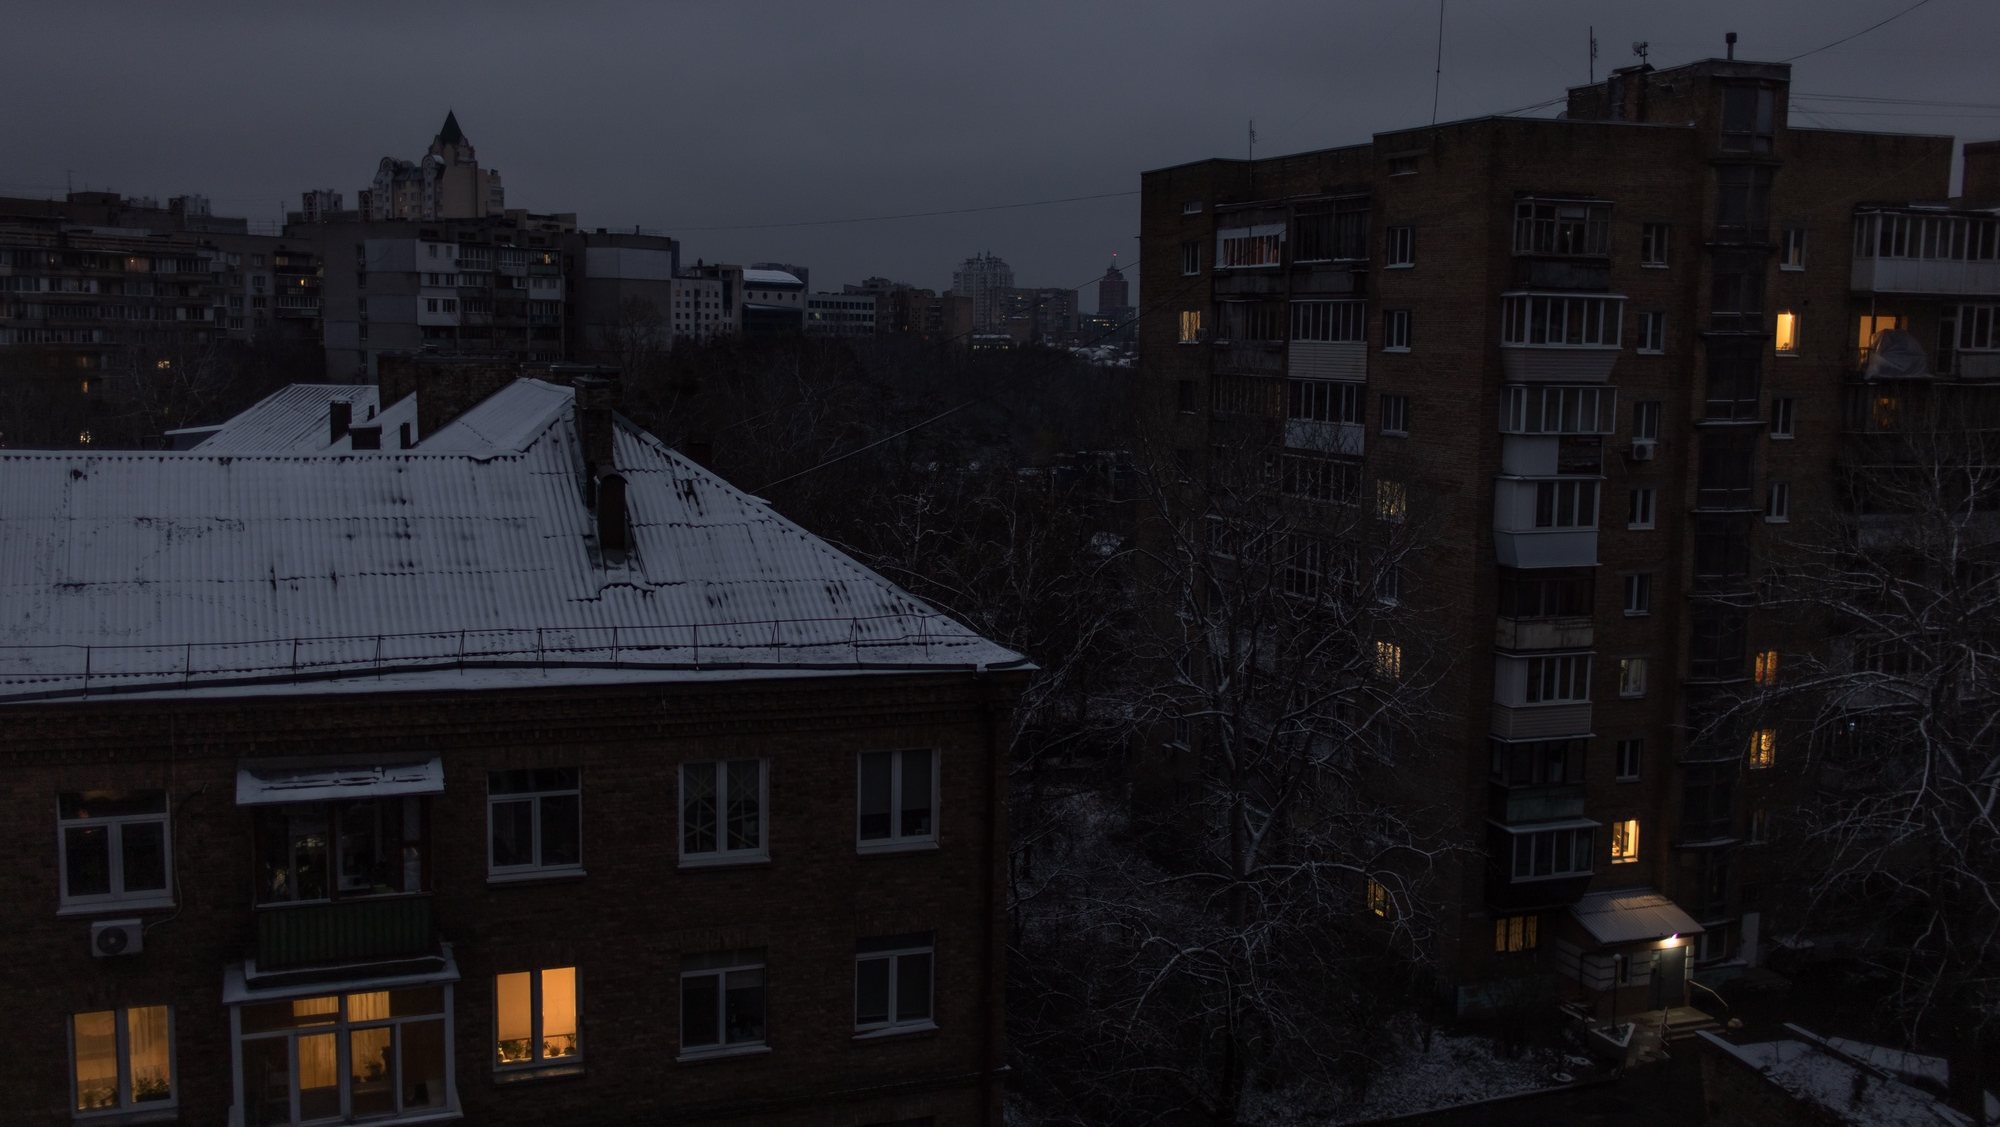 epa10310466 The first snow of the season covers residential buildings&#039; roofs during a blackout in Kyiv (Kiev), Ukraine, 17 November 2022. The approach of winter will bring tougher conditions to Ukraine including heavy mud, snow and freezing cold that will make operations more difficult for both sides in the war. Russian troops entered Ukraine on 24 February 2022, starting a conflict that has provoked destruction and a humanitarian crisis.  EPA/ROMAN PILIPEY